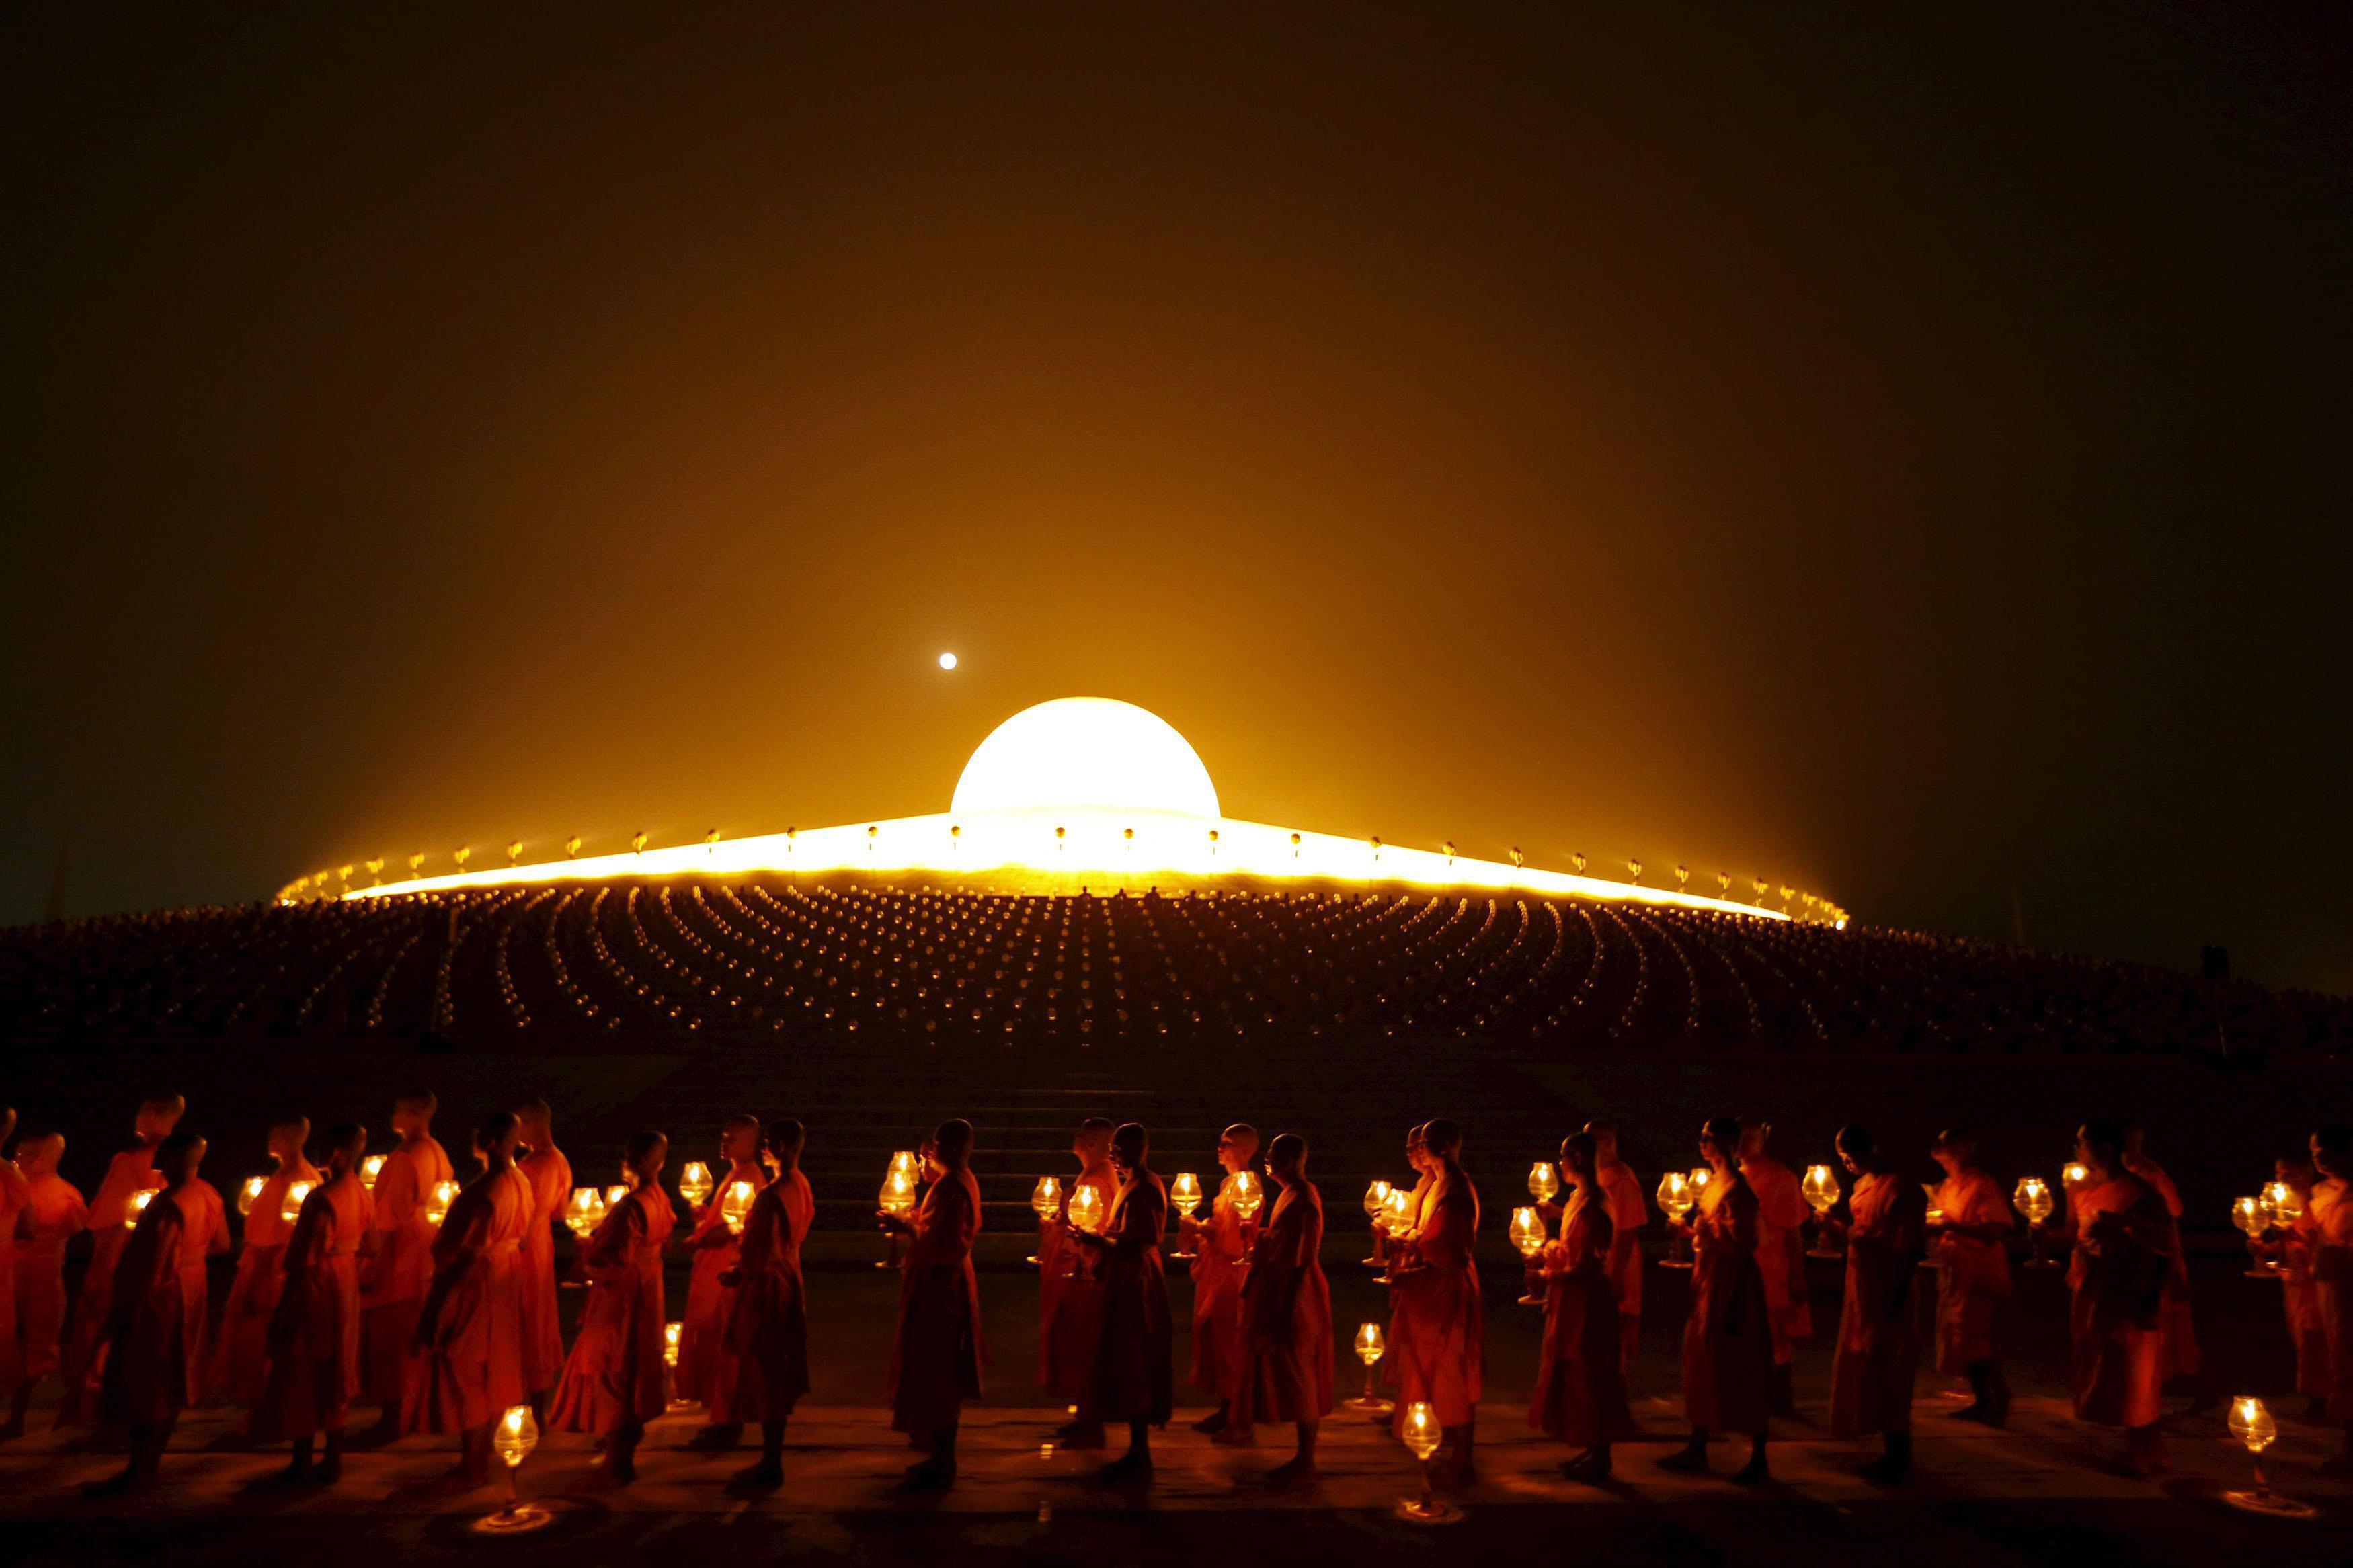 Buddhist monks pray at Wat Phra Dhammakaya temple during a ceremony on Makha Bucha Day in Pathum Tha